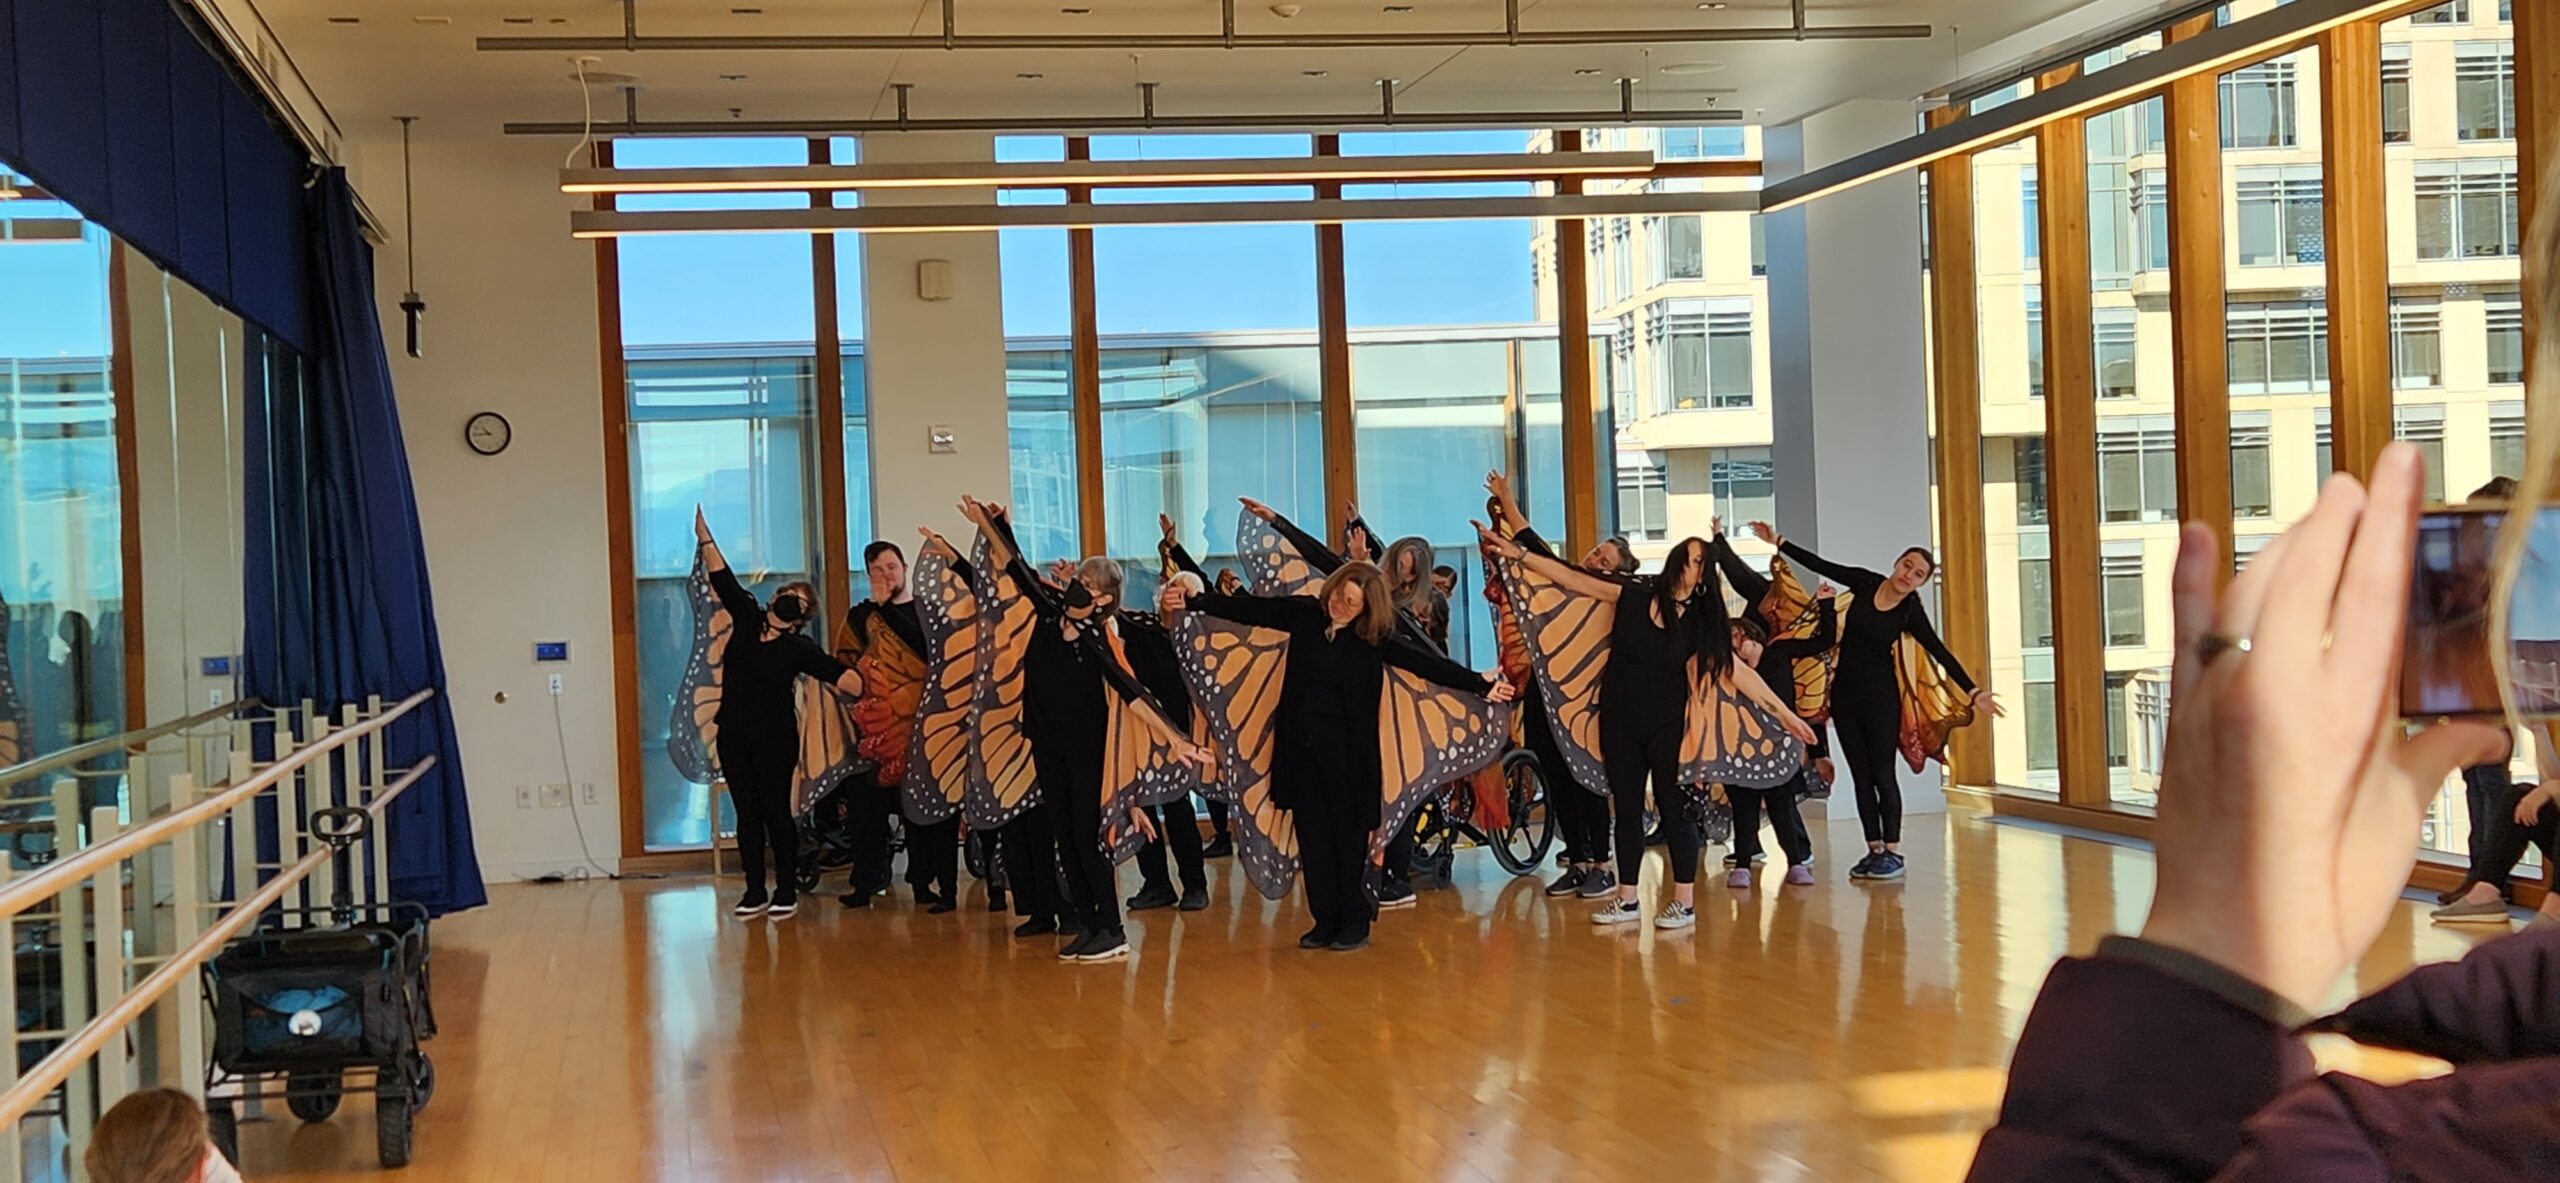 A group of people stand in formation in a dance studio. They are wearing all black clothing and each person has a pair of fabric monarch wings attached to them.